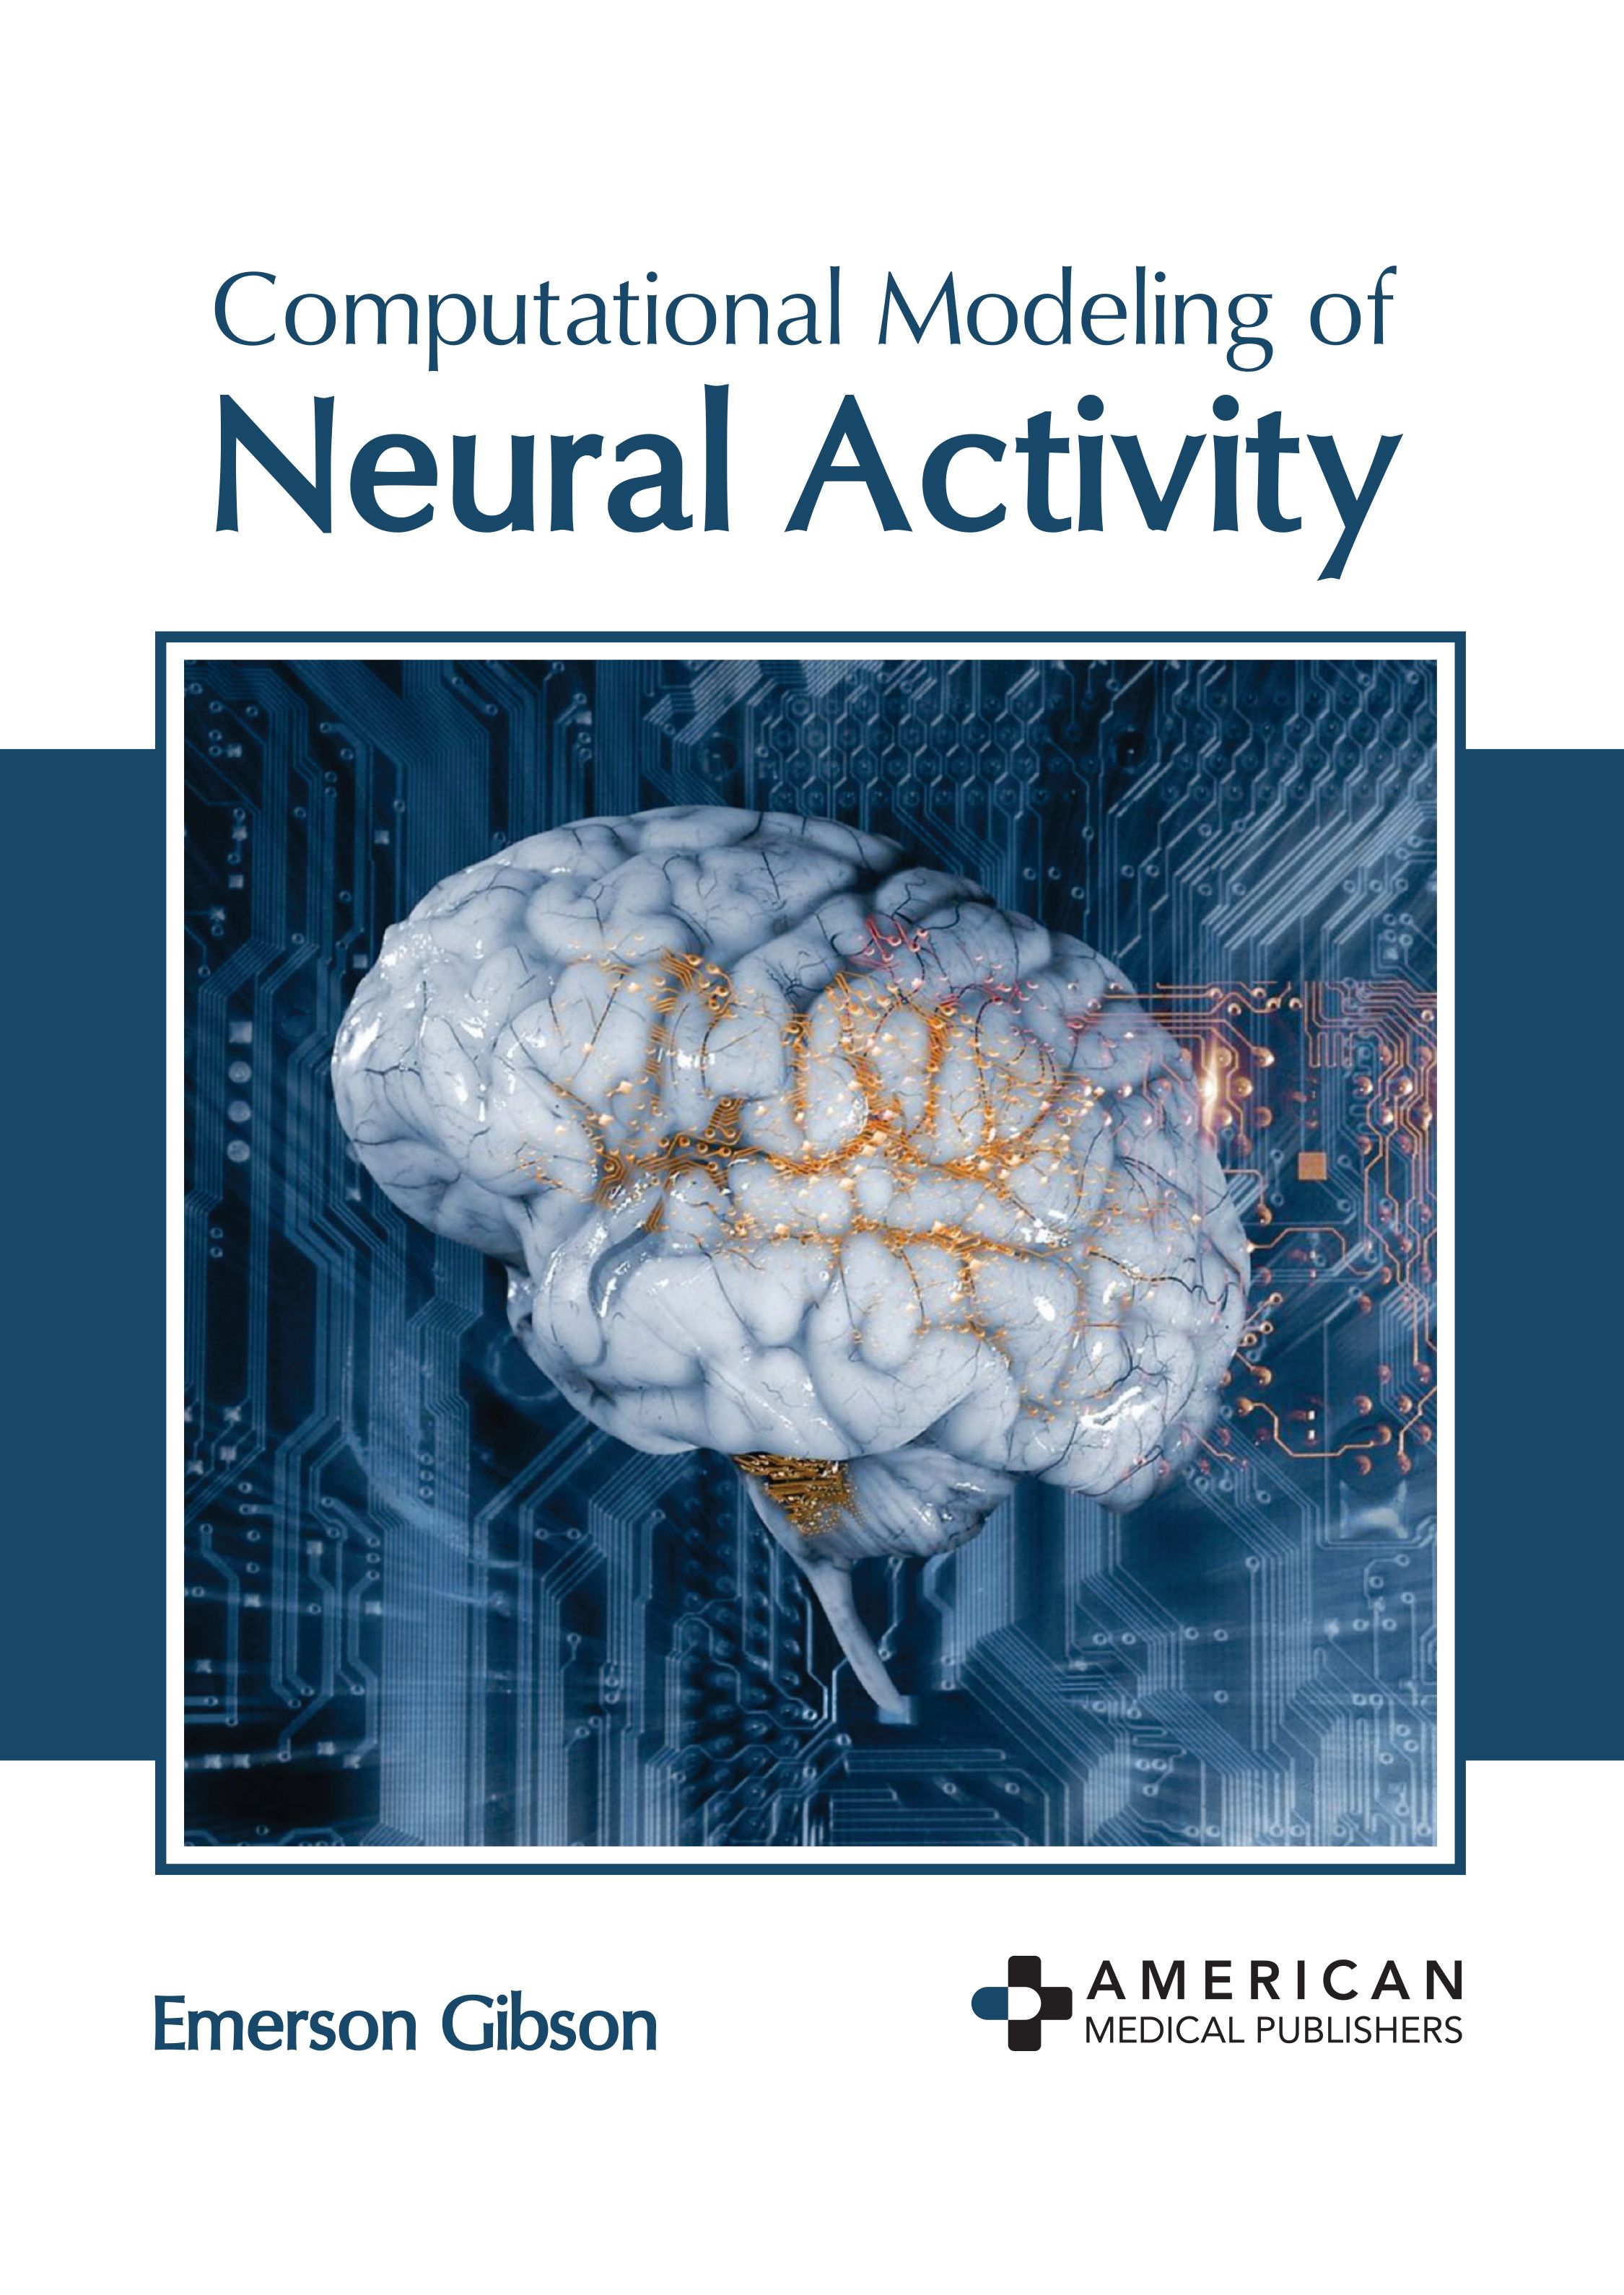 COMPUTATIONAL MODELING OF NEURAL ACTIVITY